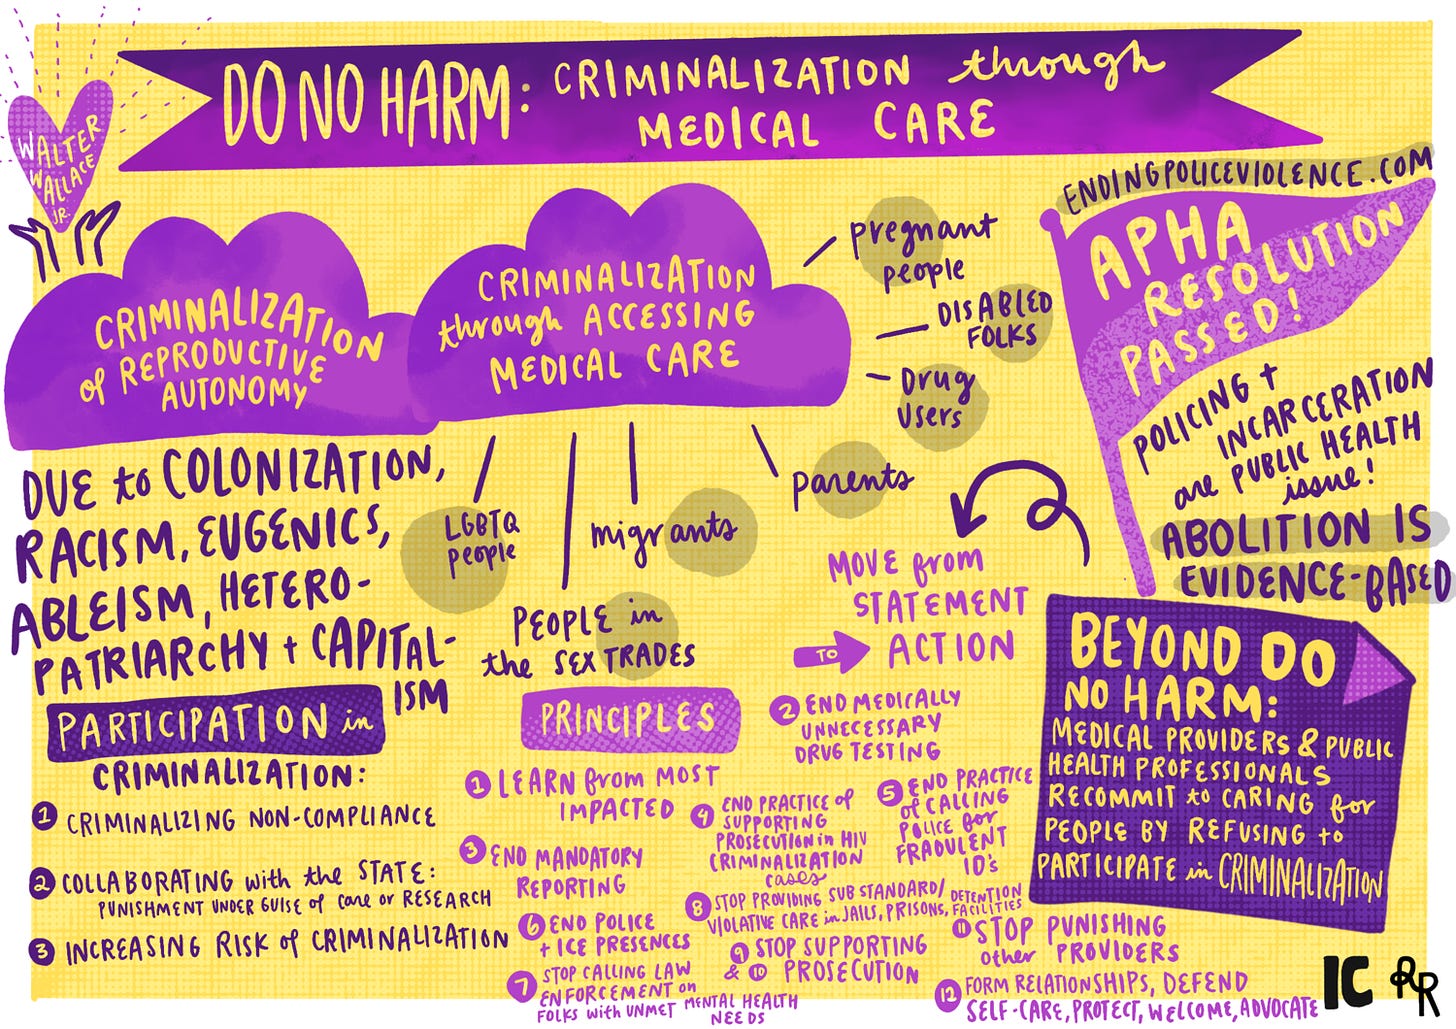 A dark purple banner on bright yellow background reads “Do No Harm: Criminalization through Medical Care.”  Criminalization of reproductive autonomy (purple cloud): Due to colonization, racism, eugenics, ableism, heterosexual-patriarchy and capitalism.   Participation in criminalization (dark purple rectangle): (1) Criminalizing non-compliance (2) Collaborating with the state: punishment under guise of care or research (3) Increasing risk of criminalization.  Criminalization through accessing medical care (purple cloud): pregnant people, disabled folks, drug users, parents, migrants, people in sex trades, LGBTQ people.   Principles (light purple rectangle): (1) Learn from most impacted (2) End medically unnecessary drug testing (3) End mandatory reporting (4) End practice of supporting prosecution in HIV criminalization cases (5) End practice of calling police for fraudulent IDs (6) End police and ICE presences (7) Stop calling law enforcement on folks with unmet mental health needs (8) Stop providing substandard and or violative care in jails, prisons, detention facilities (9 and 10) Stop supporting prosecution (11) Stop punishing other providers (12) Form relationships, defend self-care, protect, welcome, advocate.  Light purple flag reads “APHA Resolultion Passed” with [SITE] endingpolice.com written over it. Underneath it reads “Policing and incarceration are public health issues. Abolition is evidence-based.”  Beyond do no harm (large dark purple square): Medical providers and public health professionals recommit to caring for people by refusing to participate in criminalization.